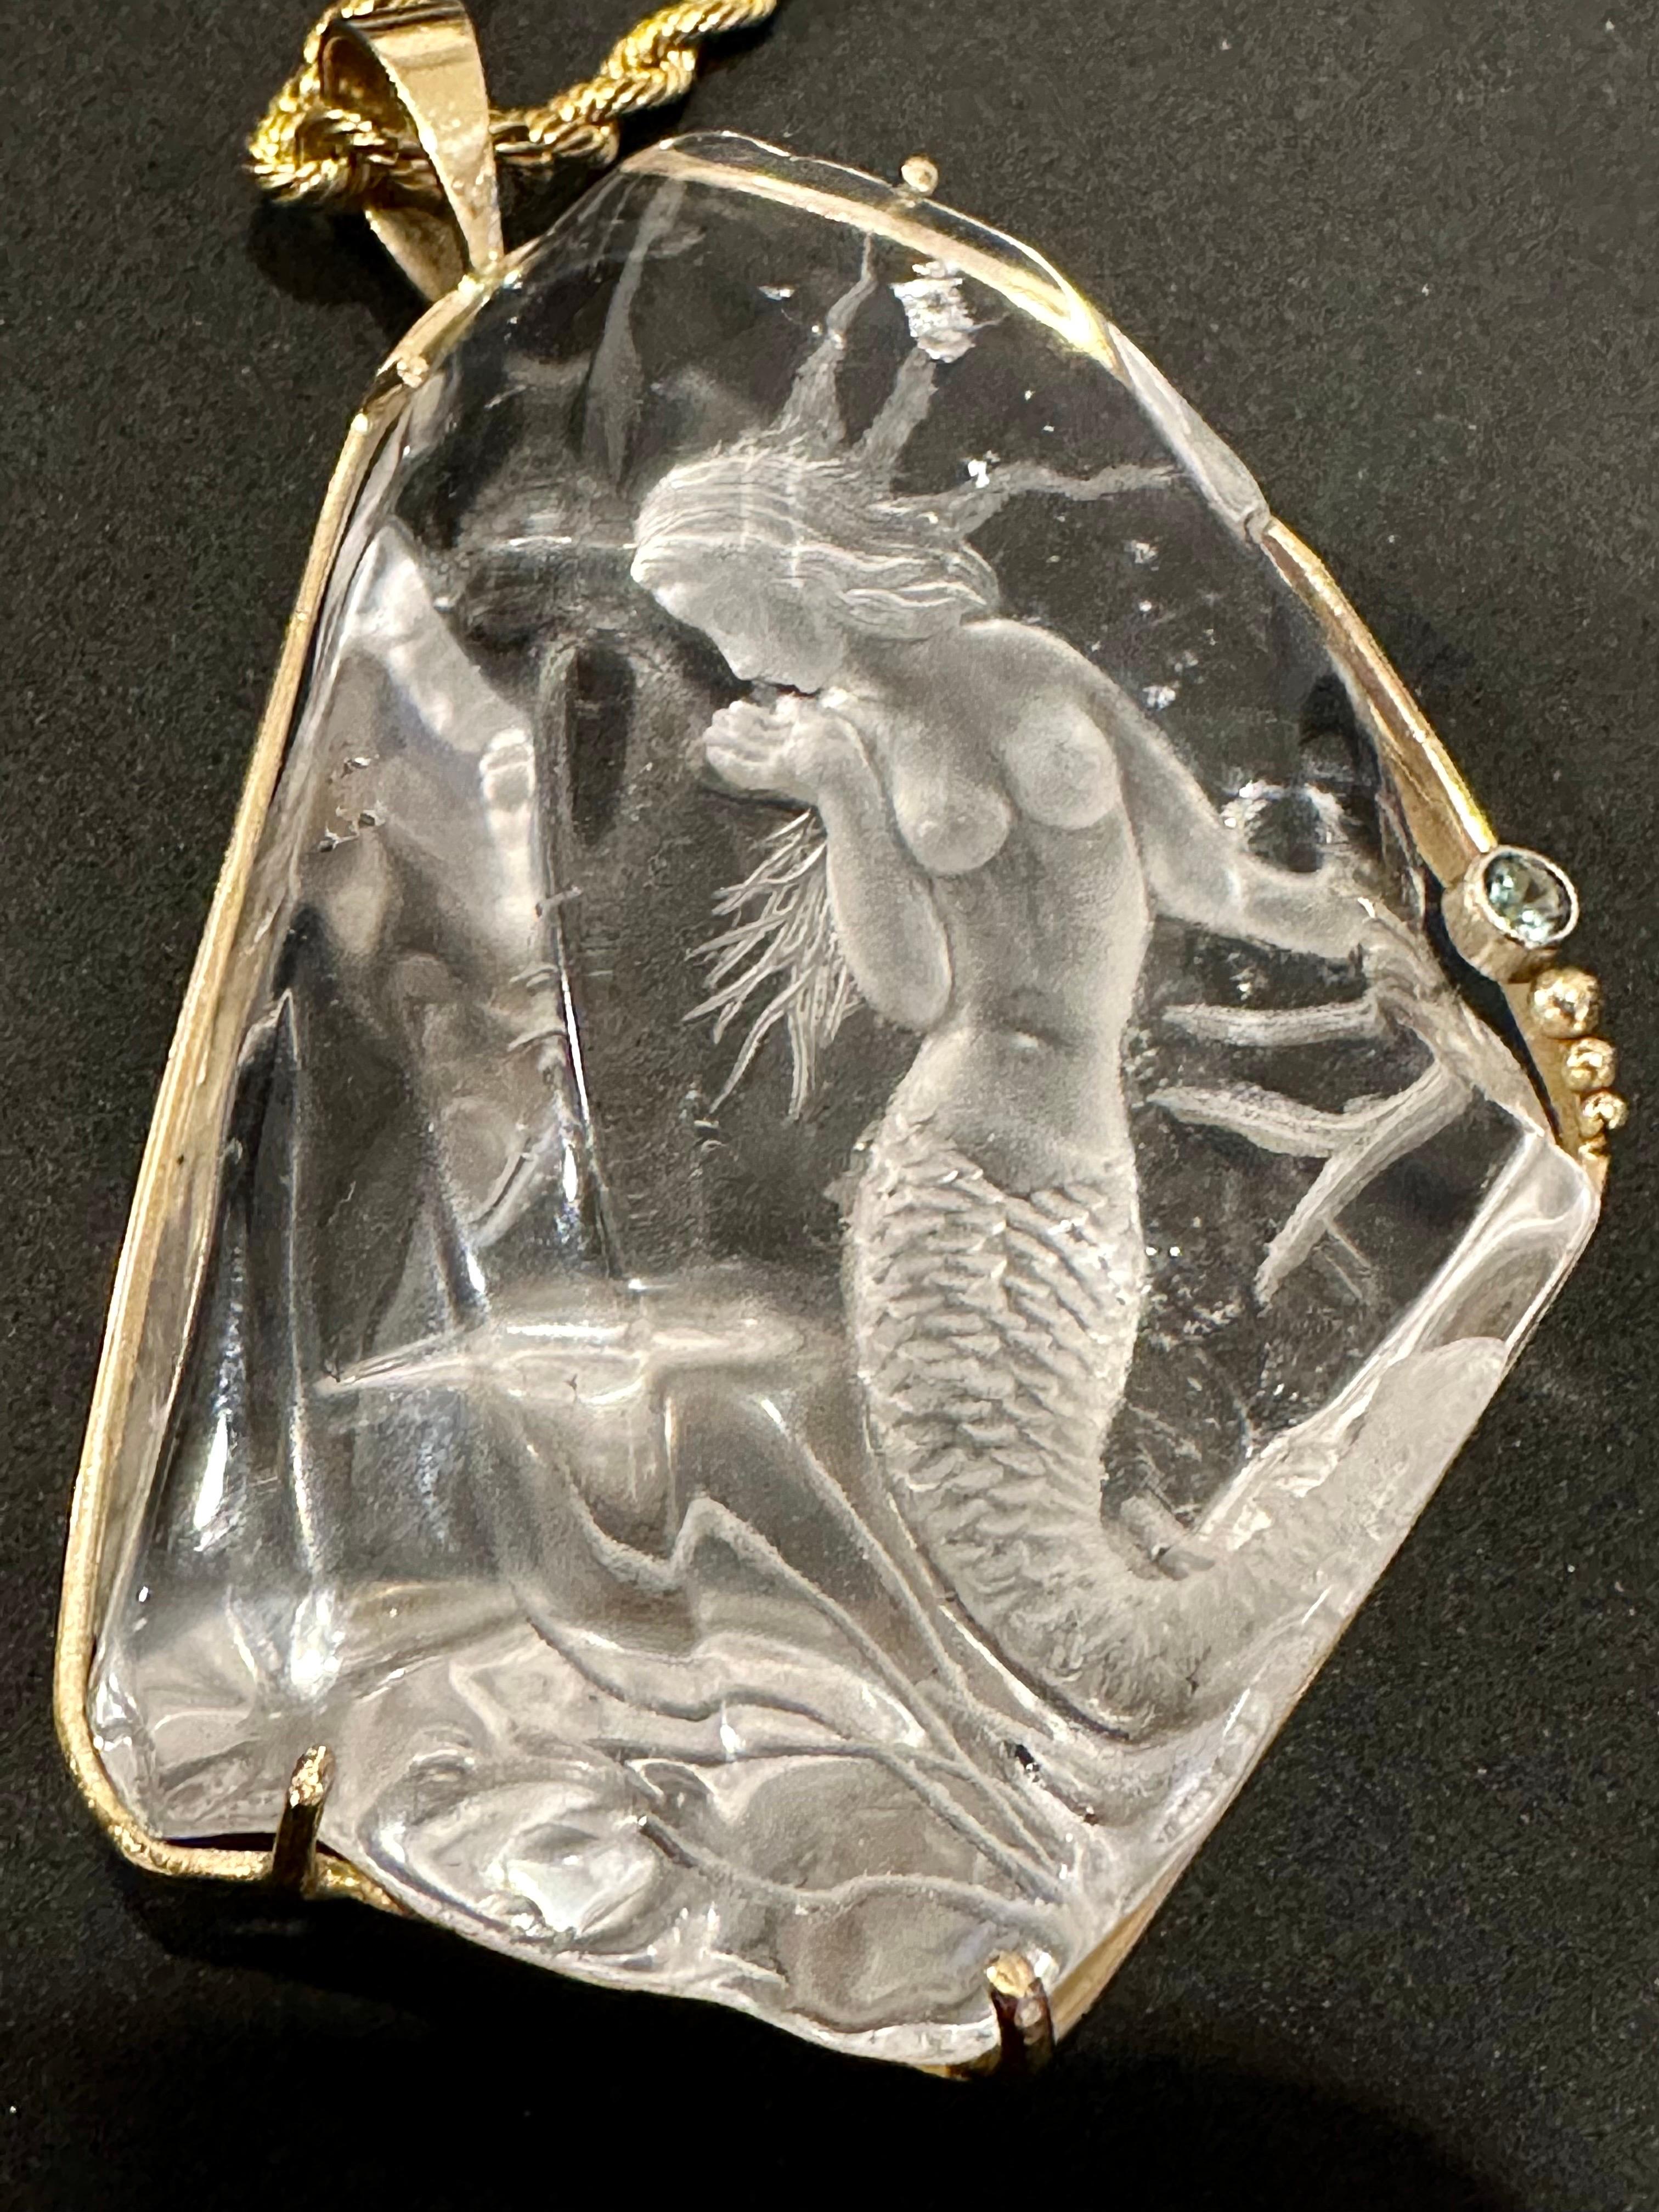 
For your consideration, this fabulous vintage 14K yellow gold fitted Crystal Mermaid figurine pendant is a must-have in your jewelry collection. The craft of the pendant is Amazing, with intricate details and excellent craftsmanship. 

The pendant